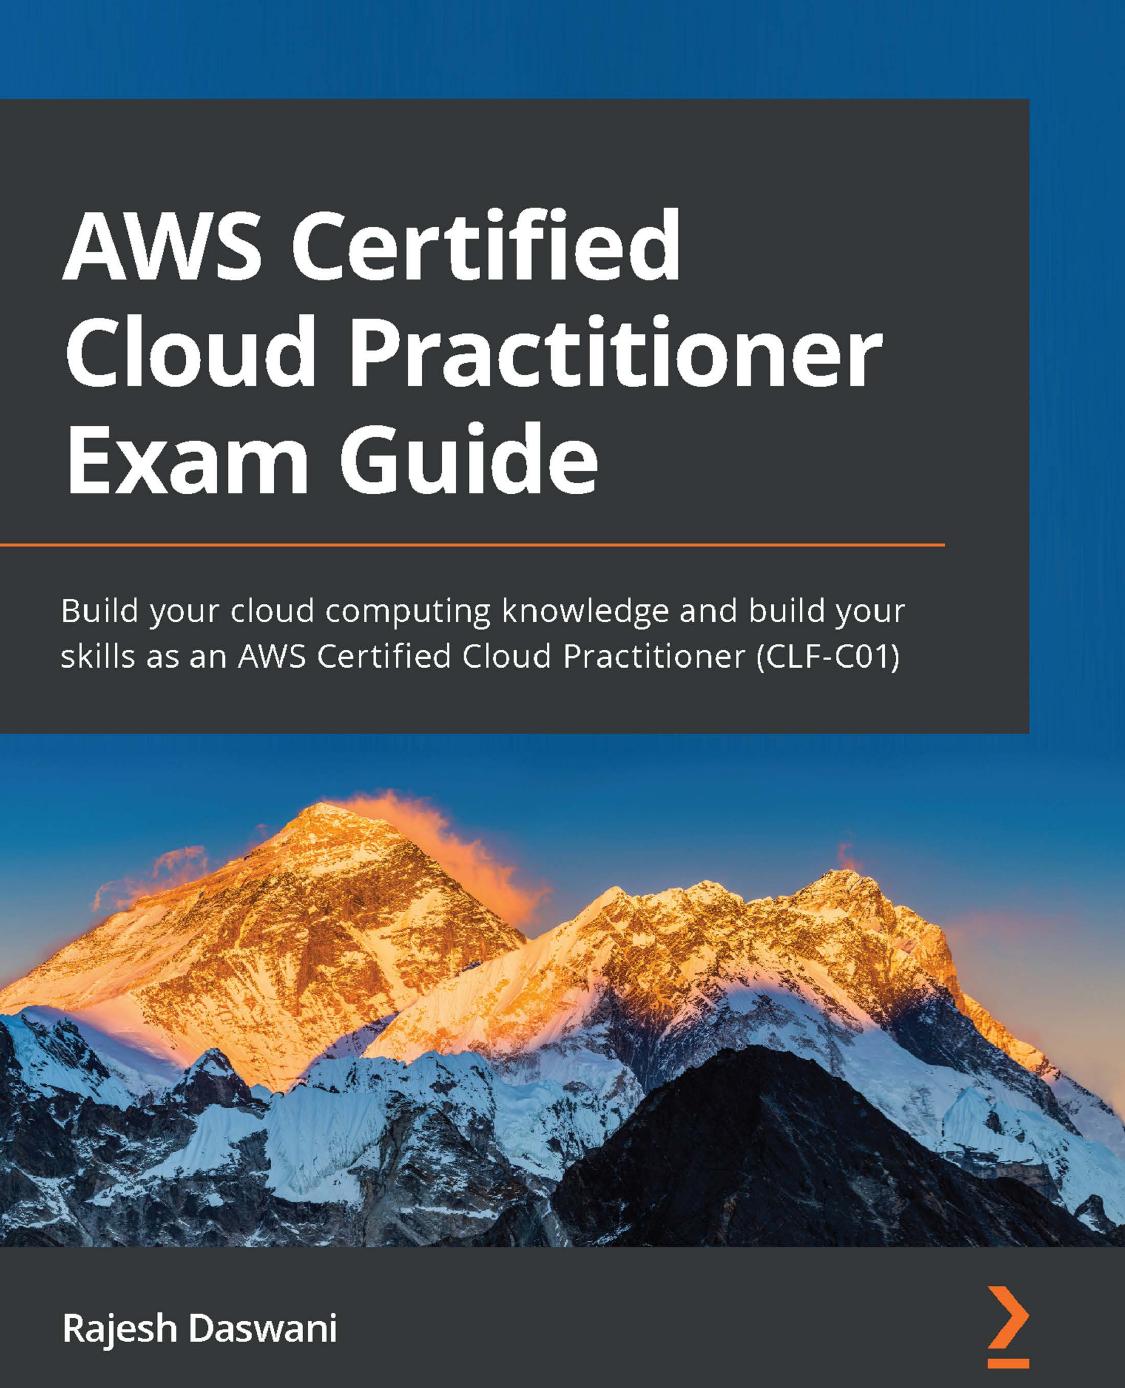 AWS Certified Cloud Practitioner Exam Guide: Build your cloud computing knowledge and build your skills as an AWS Certified Cloud Practitioner (CLF-C01) by Rajesh Daswani